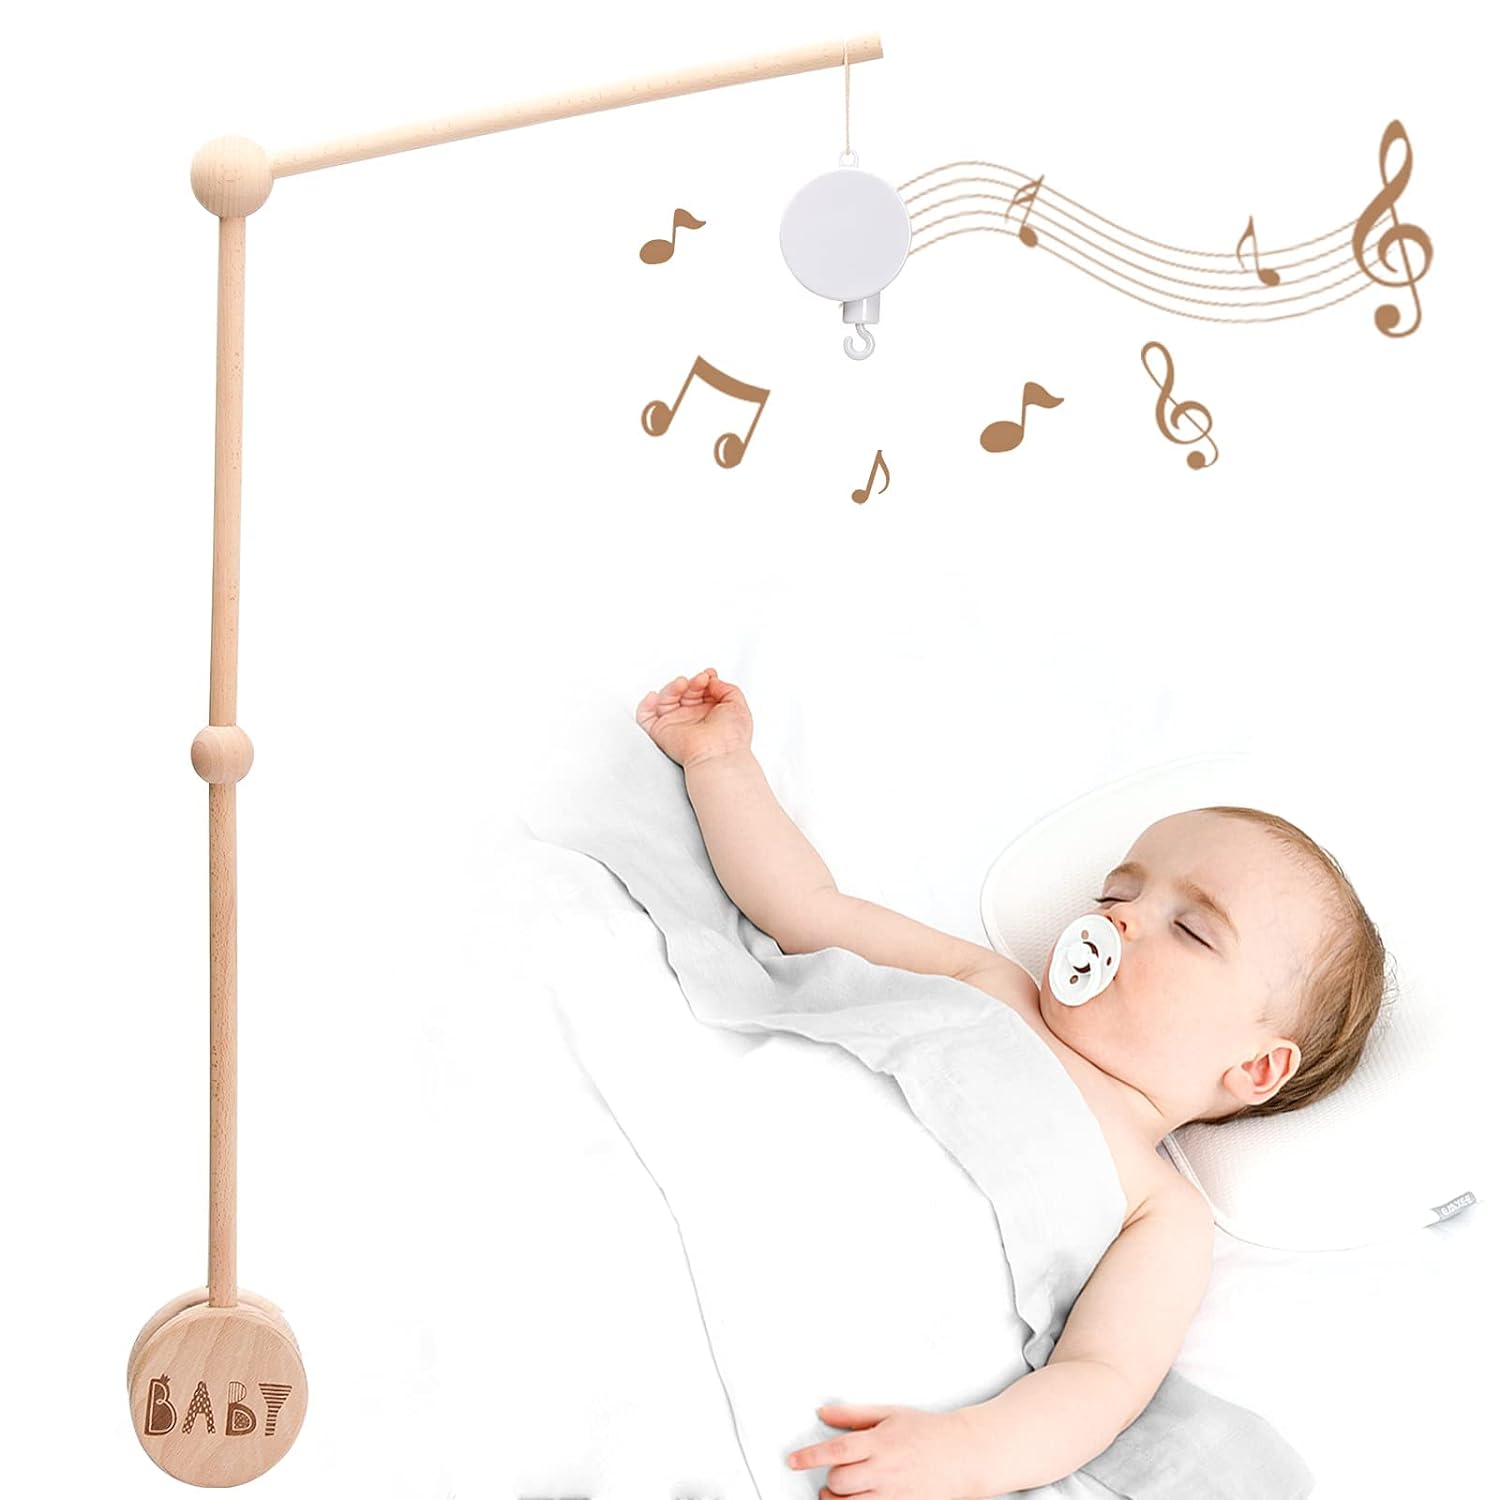 JETM·HH Baby Crib Mobile Arm Wooden Holder 30 inch Beech Hangers